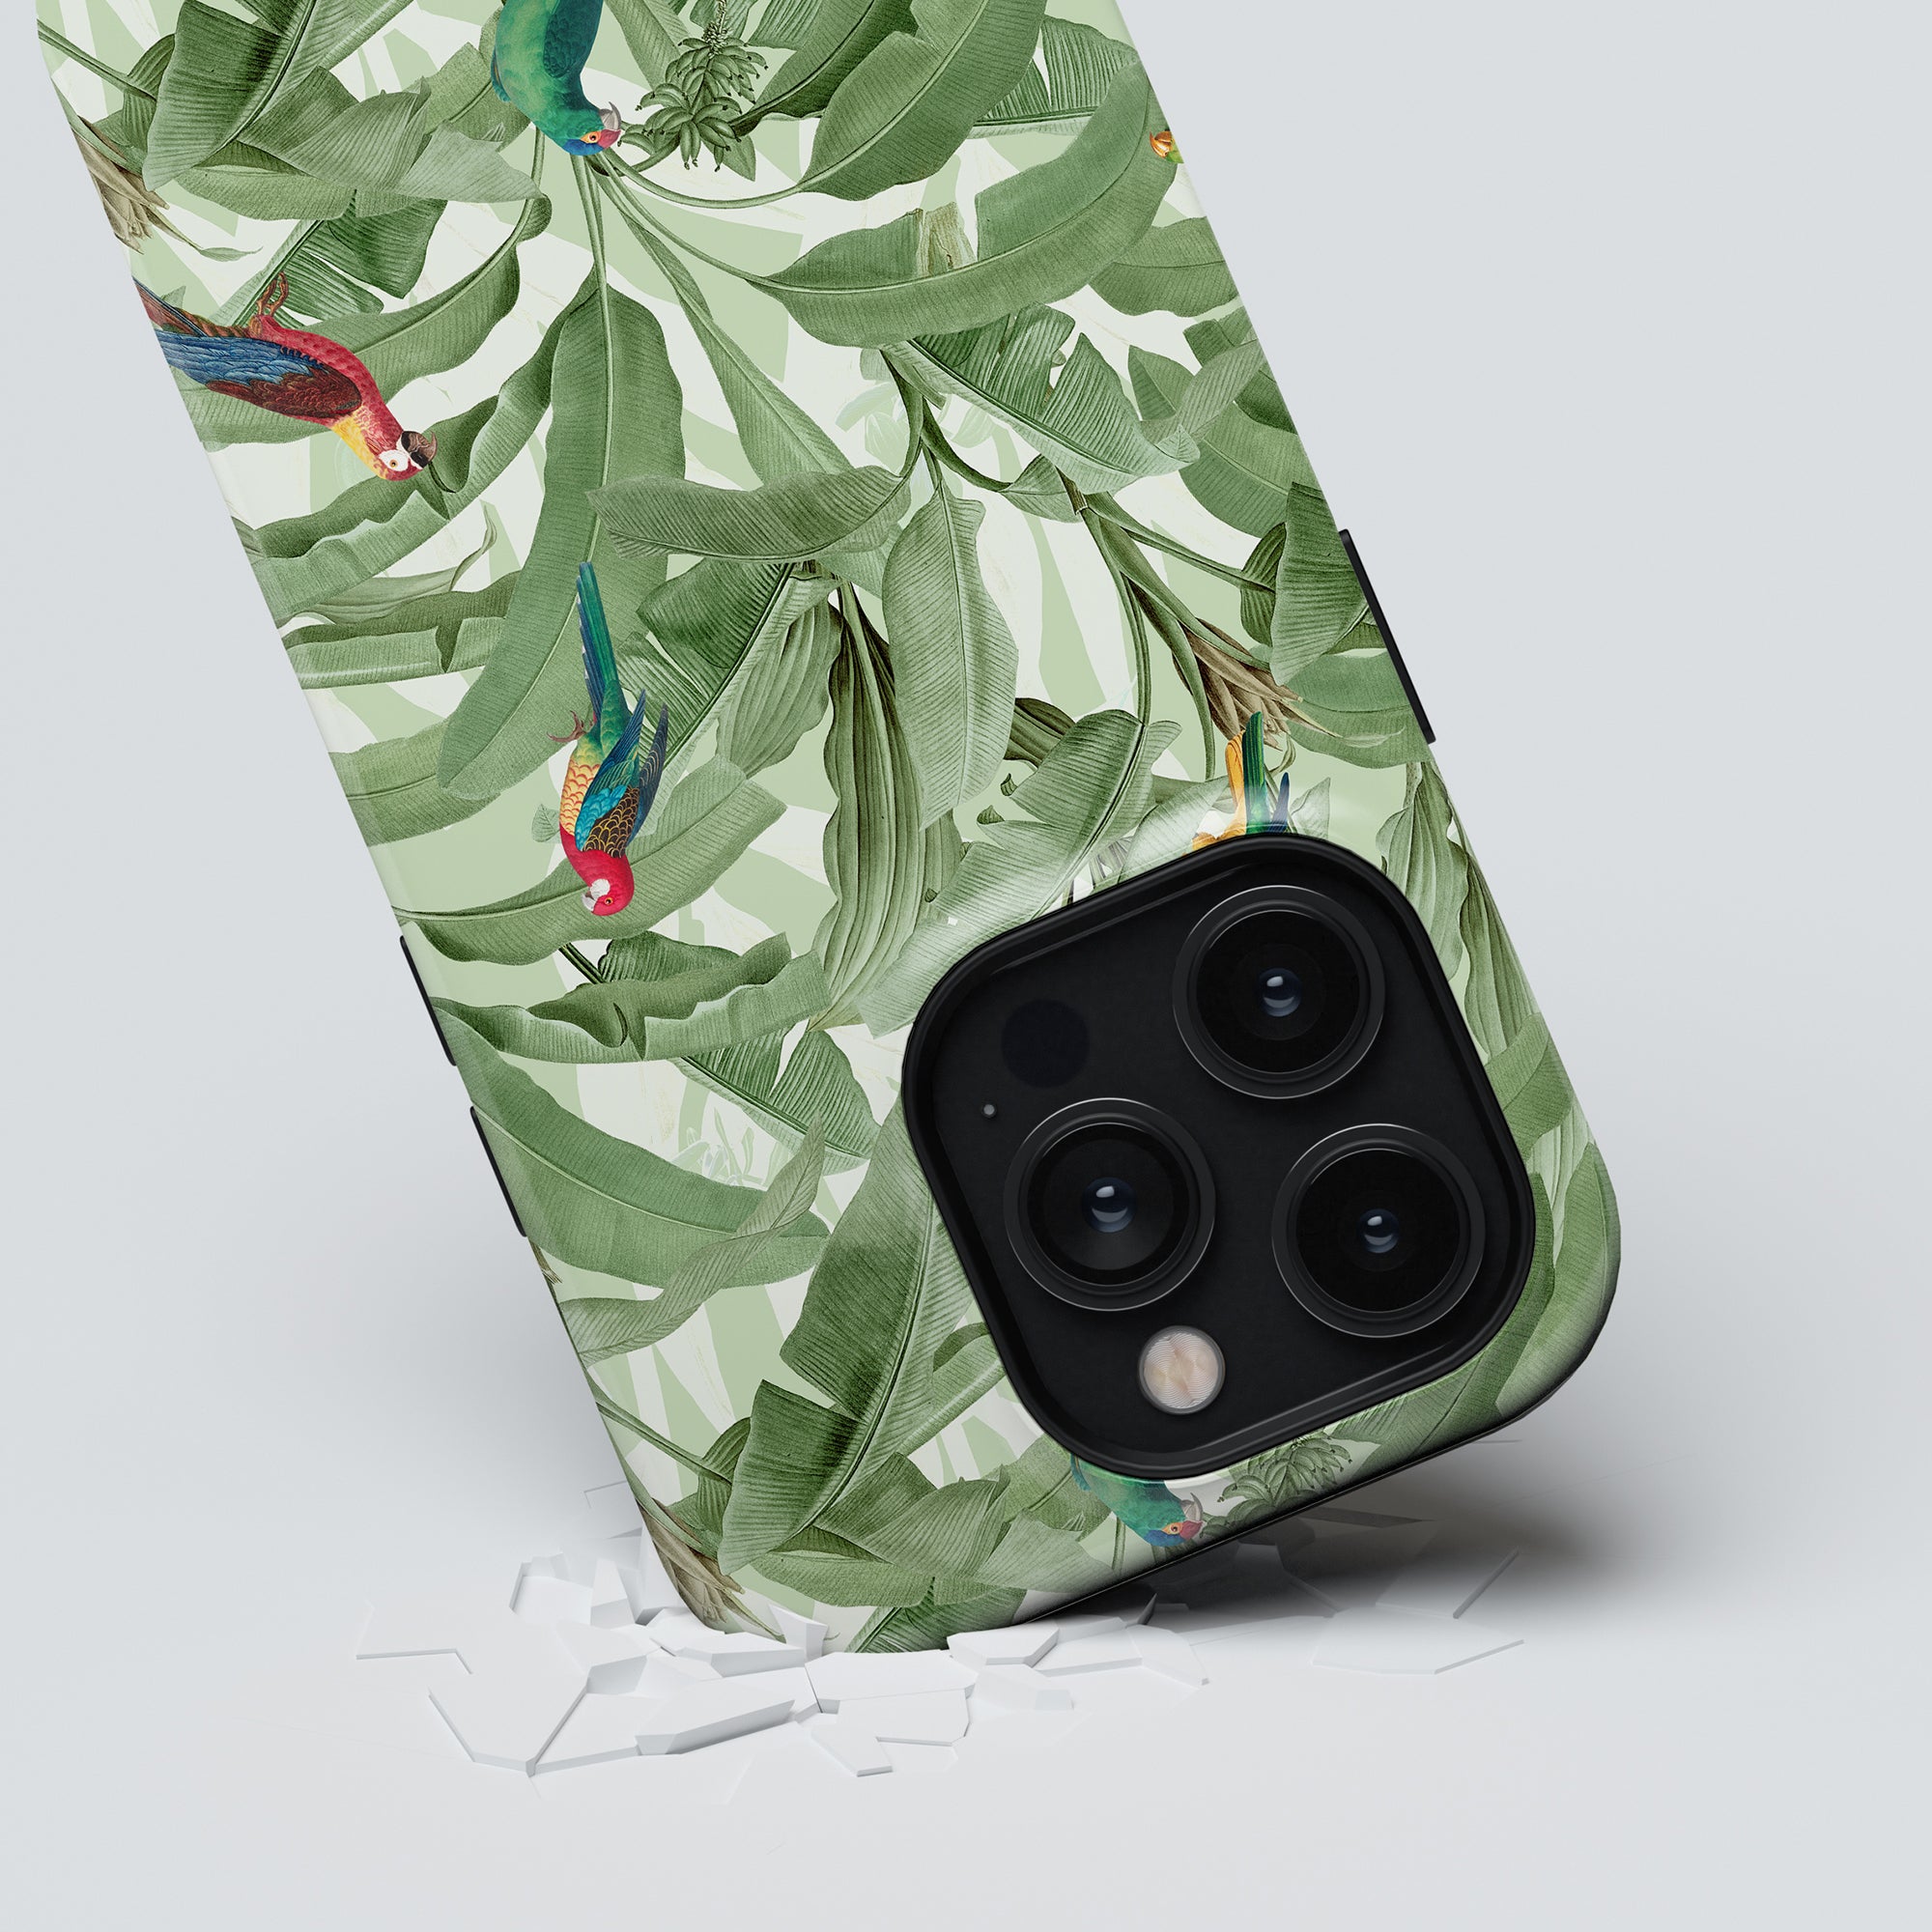 Smartphone with a Parrot Paradise - Tough Case and triple-lens camera breaking through a surface.